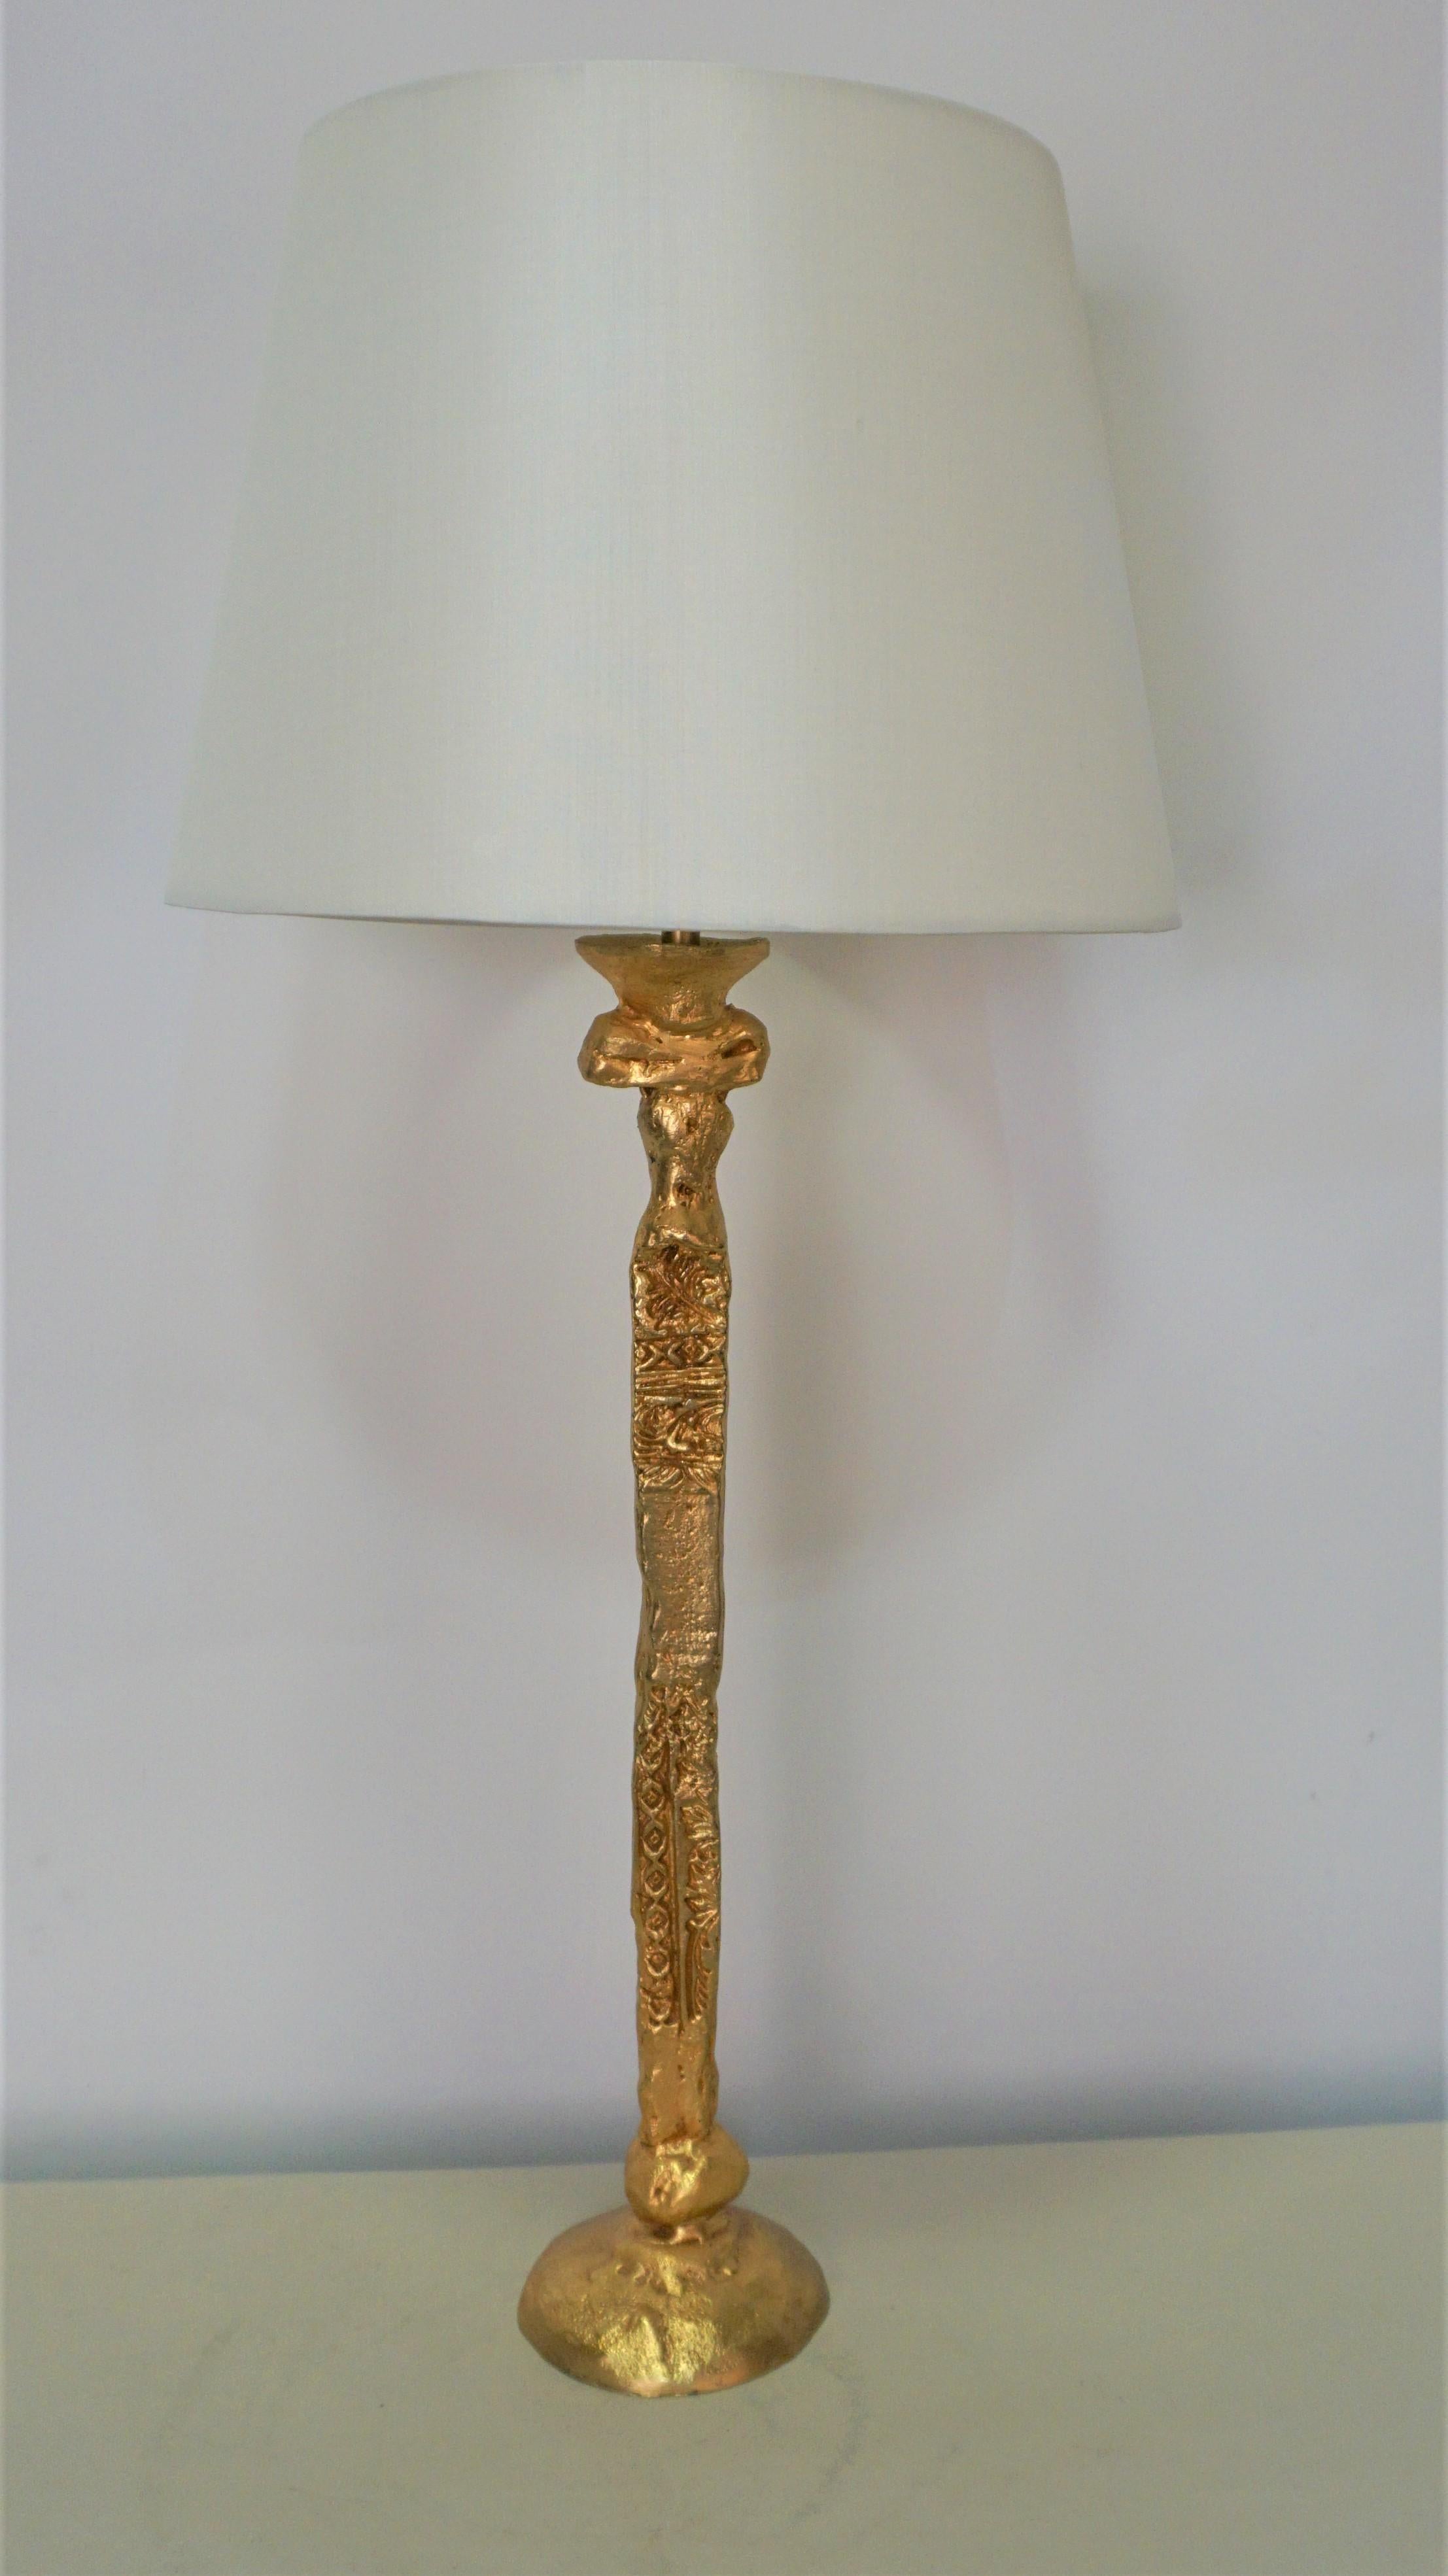 A fantastic 1980's sculptural gilt table lamp by Pierre Casenove for Fondica.